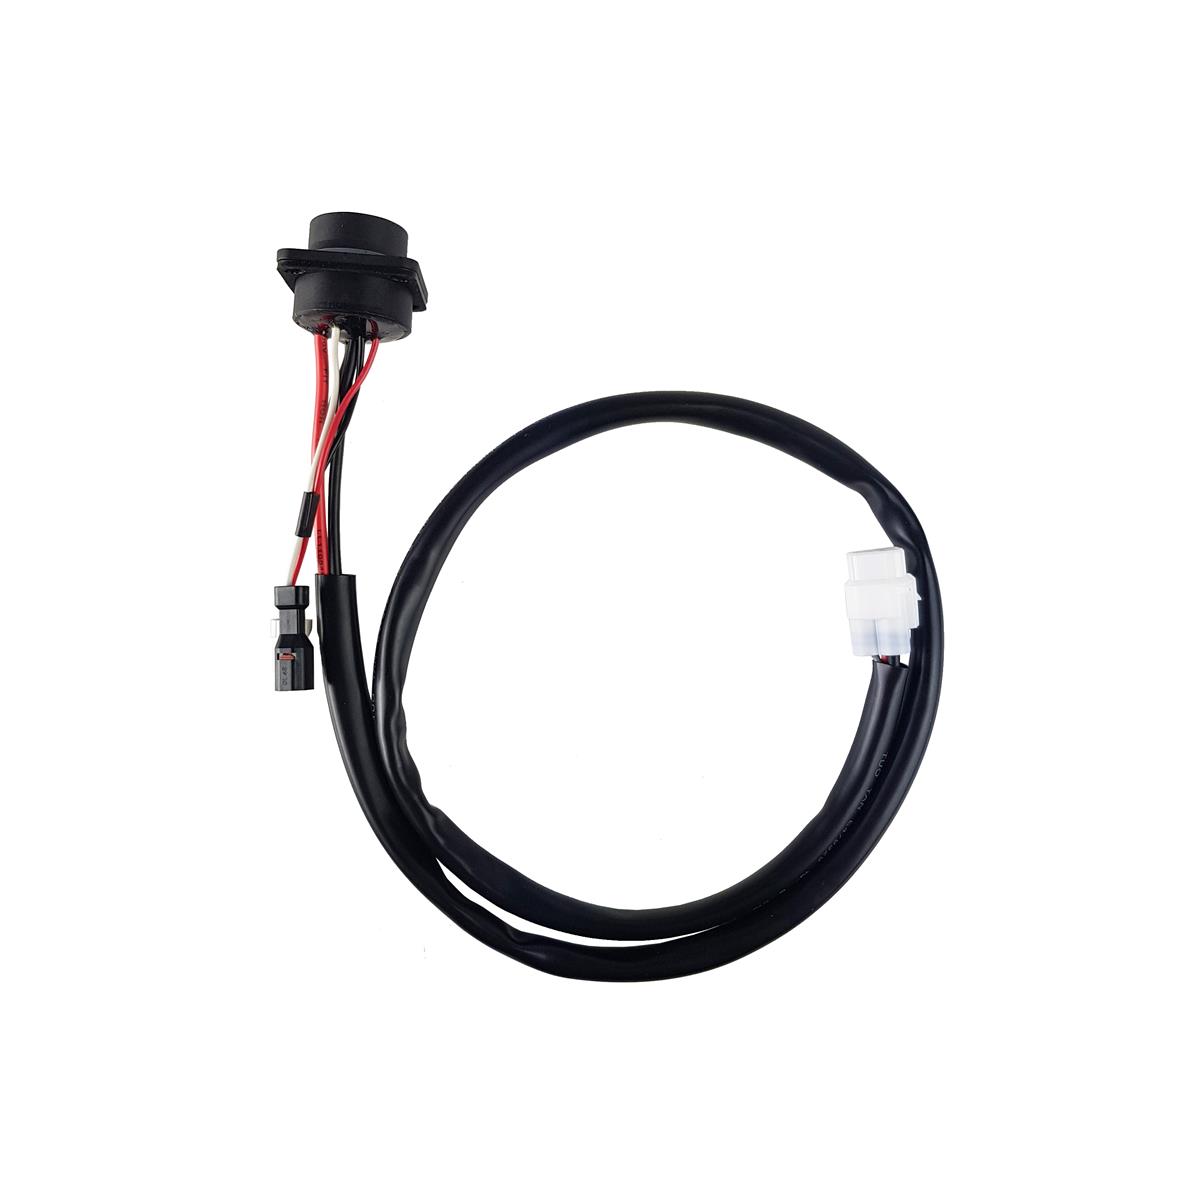 Battery - engine cable for winora frames intube batteries 700mm